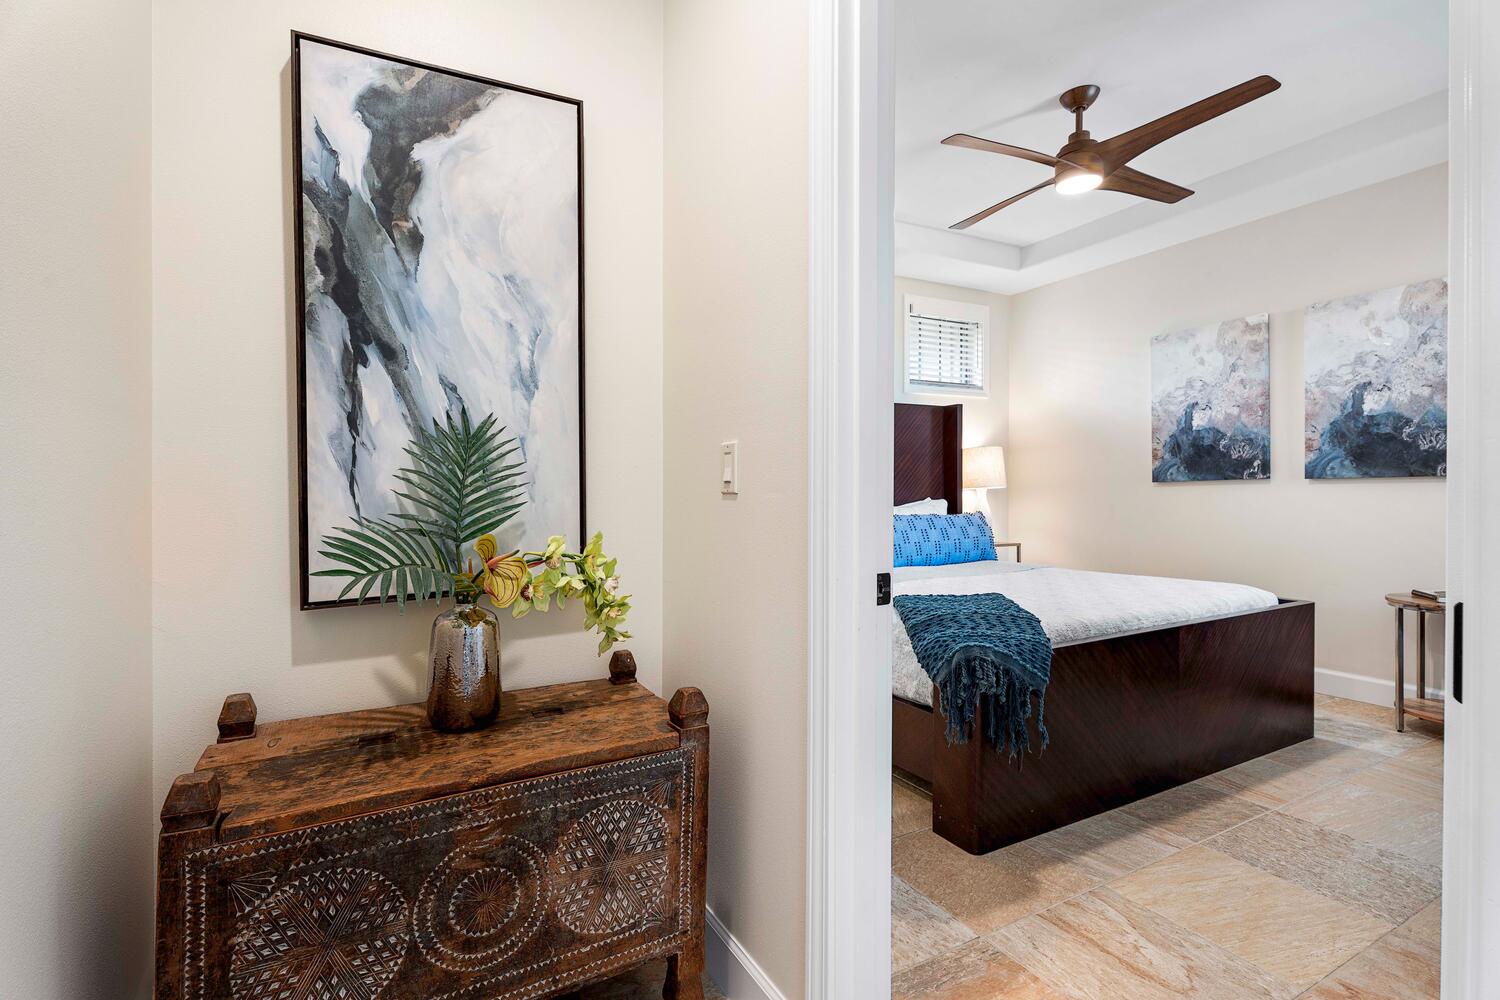 Kailua-Kona Vacation Rentals, Holua Kai #26 - Charming entryway leading to the second guest bedroom enhanced by striking artwork and vintage furniture.